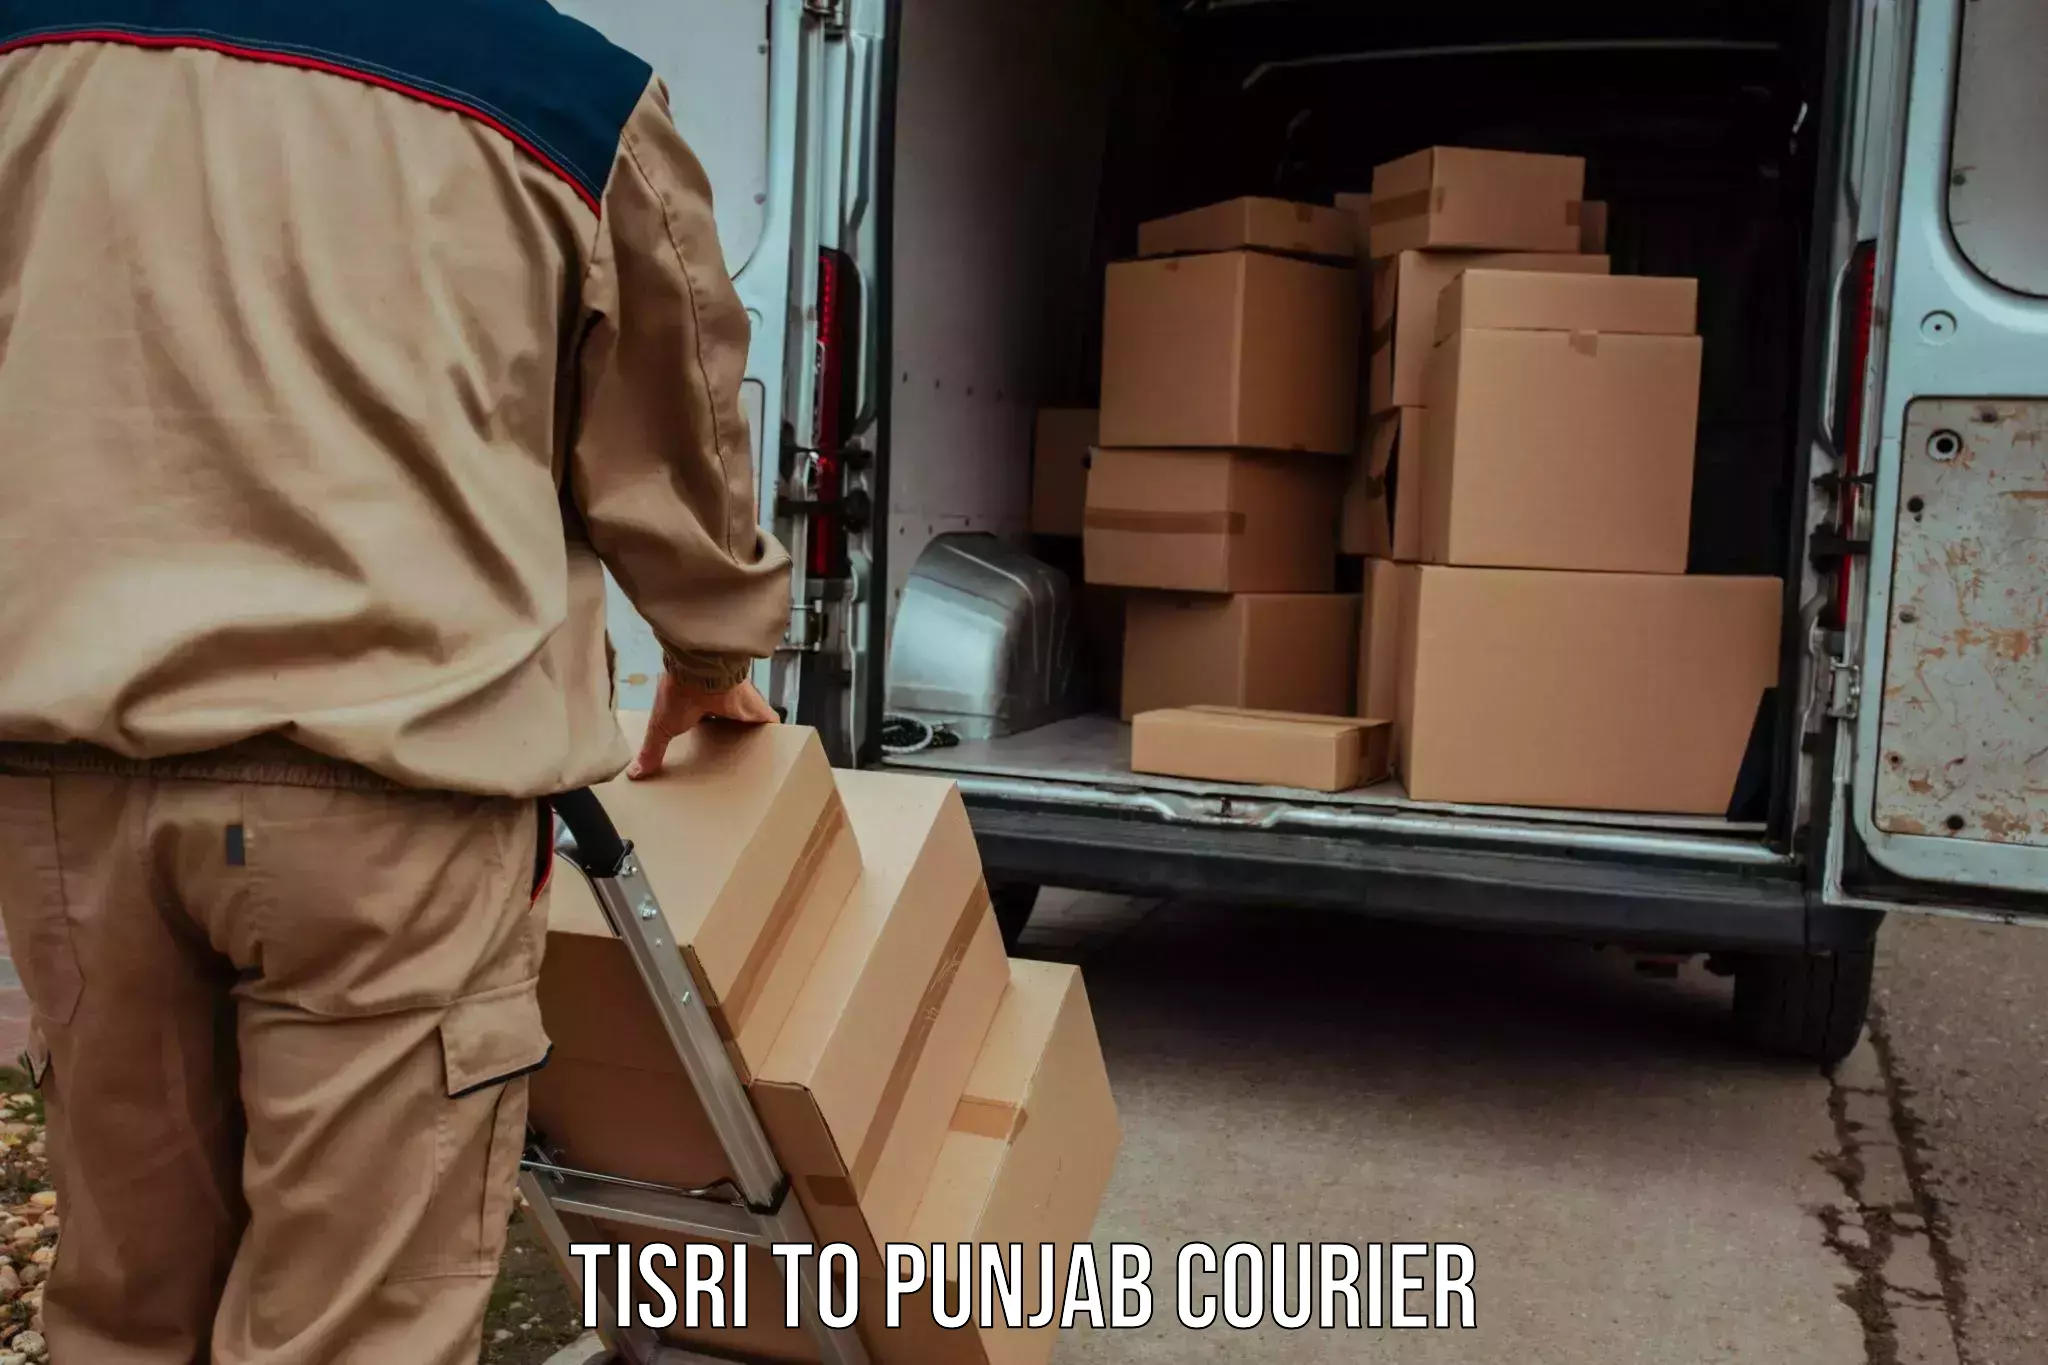 24/7 courier service in Tisri to Punjab